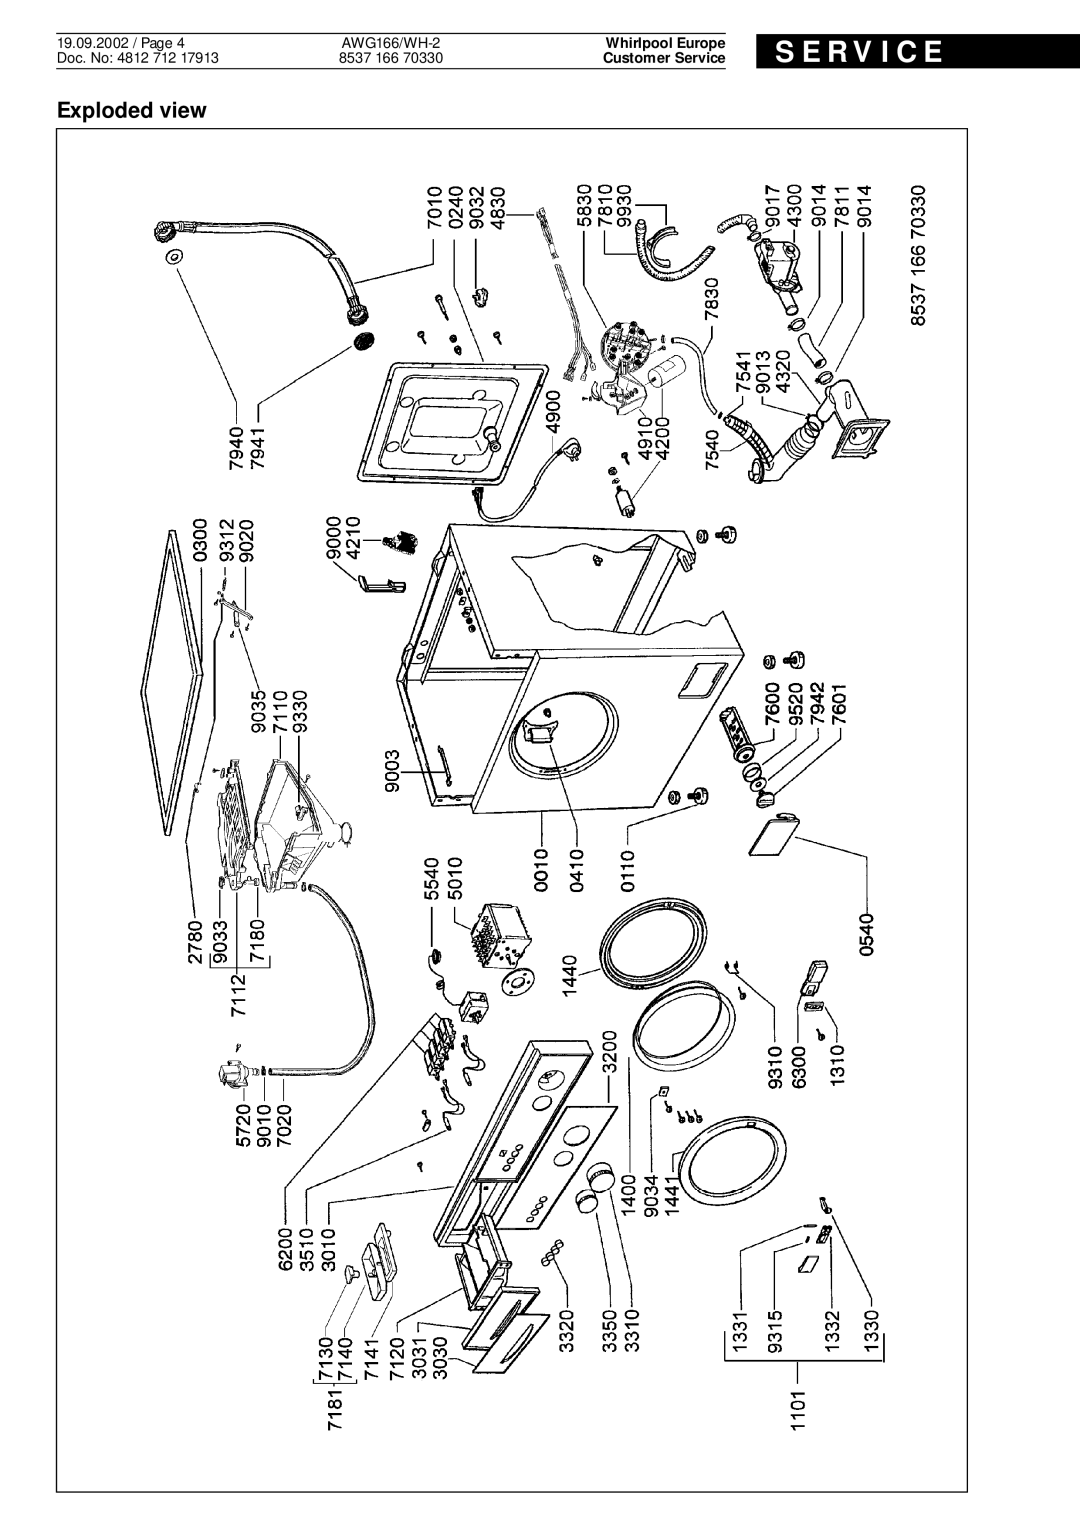 Whirlpool AWG166 WH-2 service manual Exploded view, S E R V I C E, Whirlpool Europe, Customer Service 